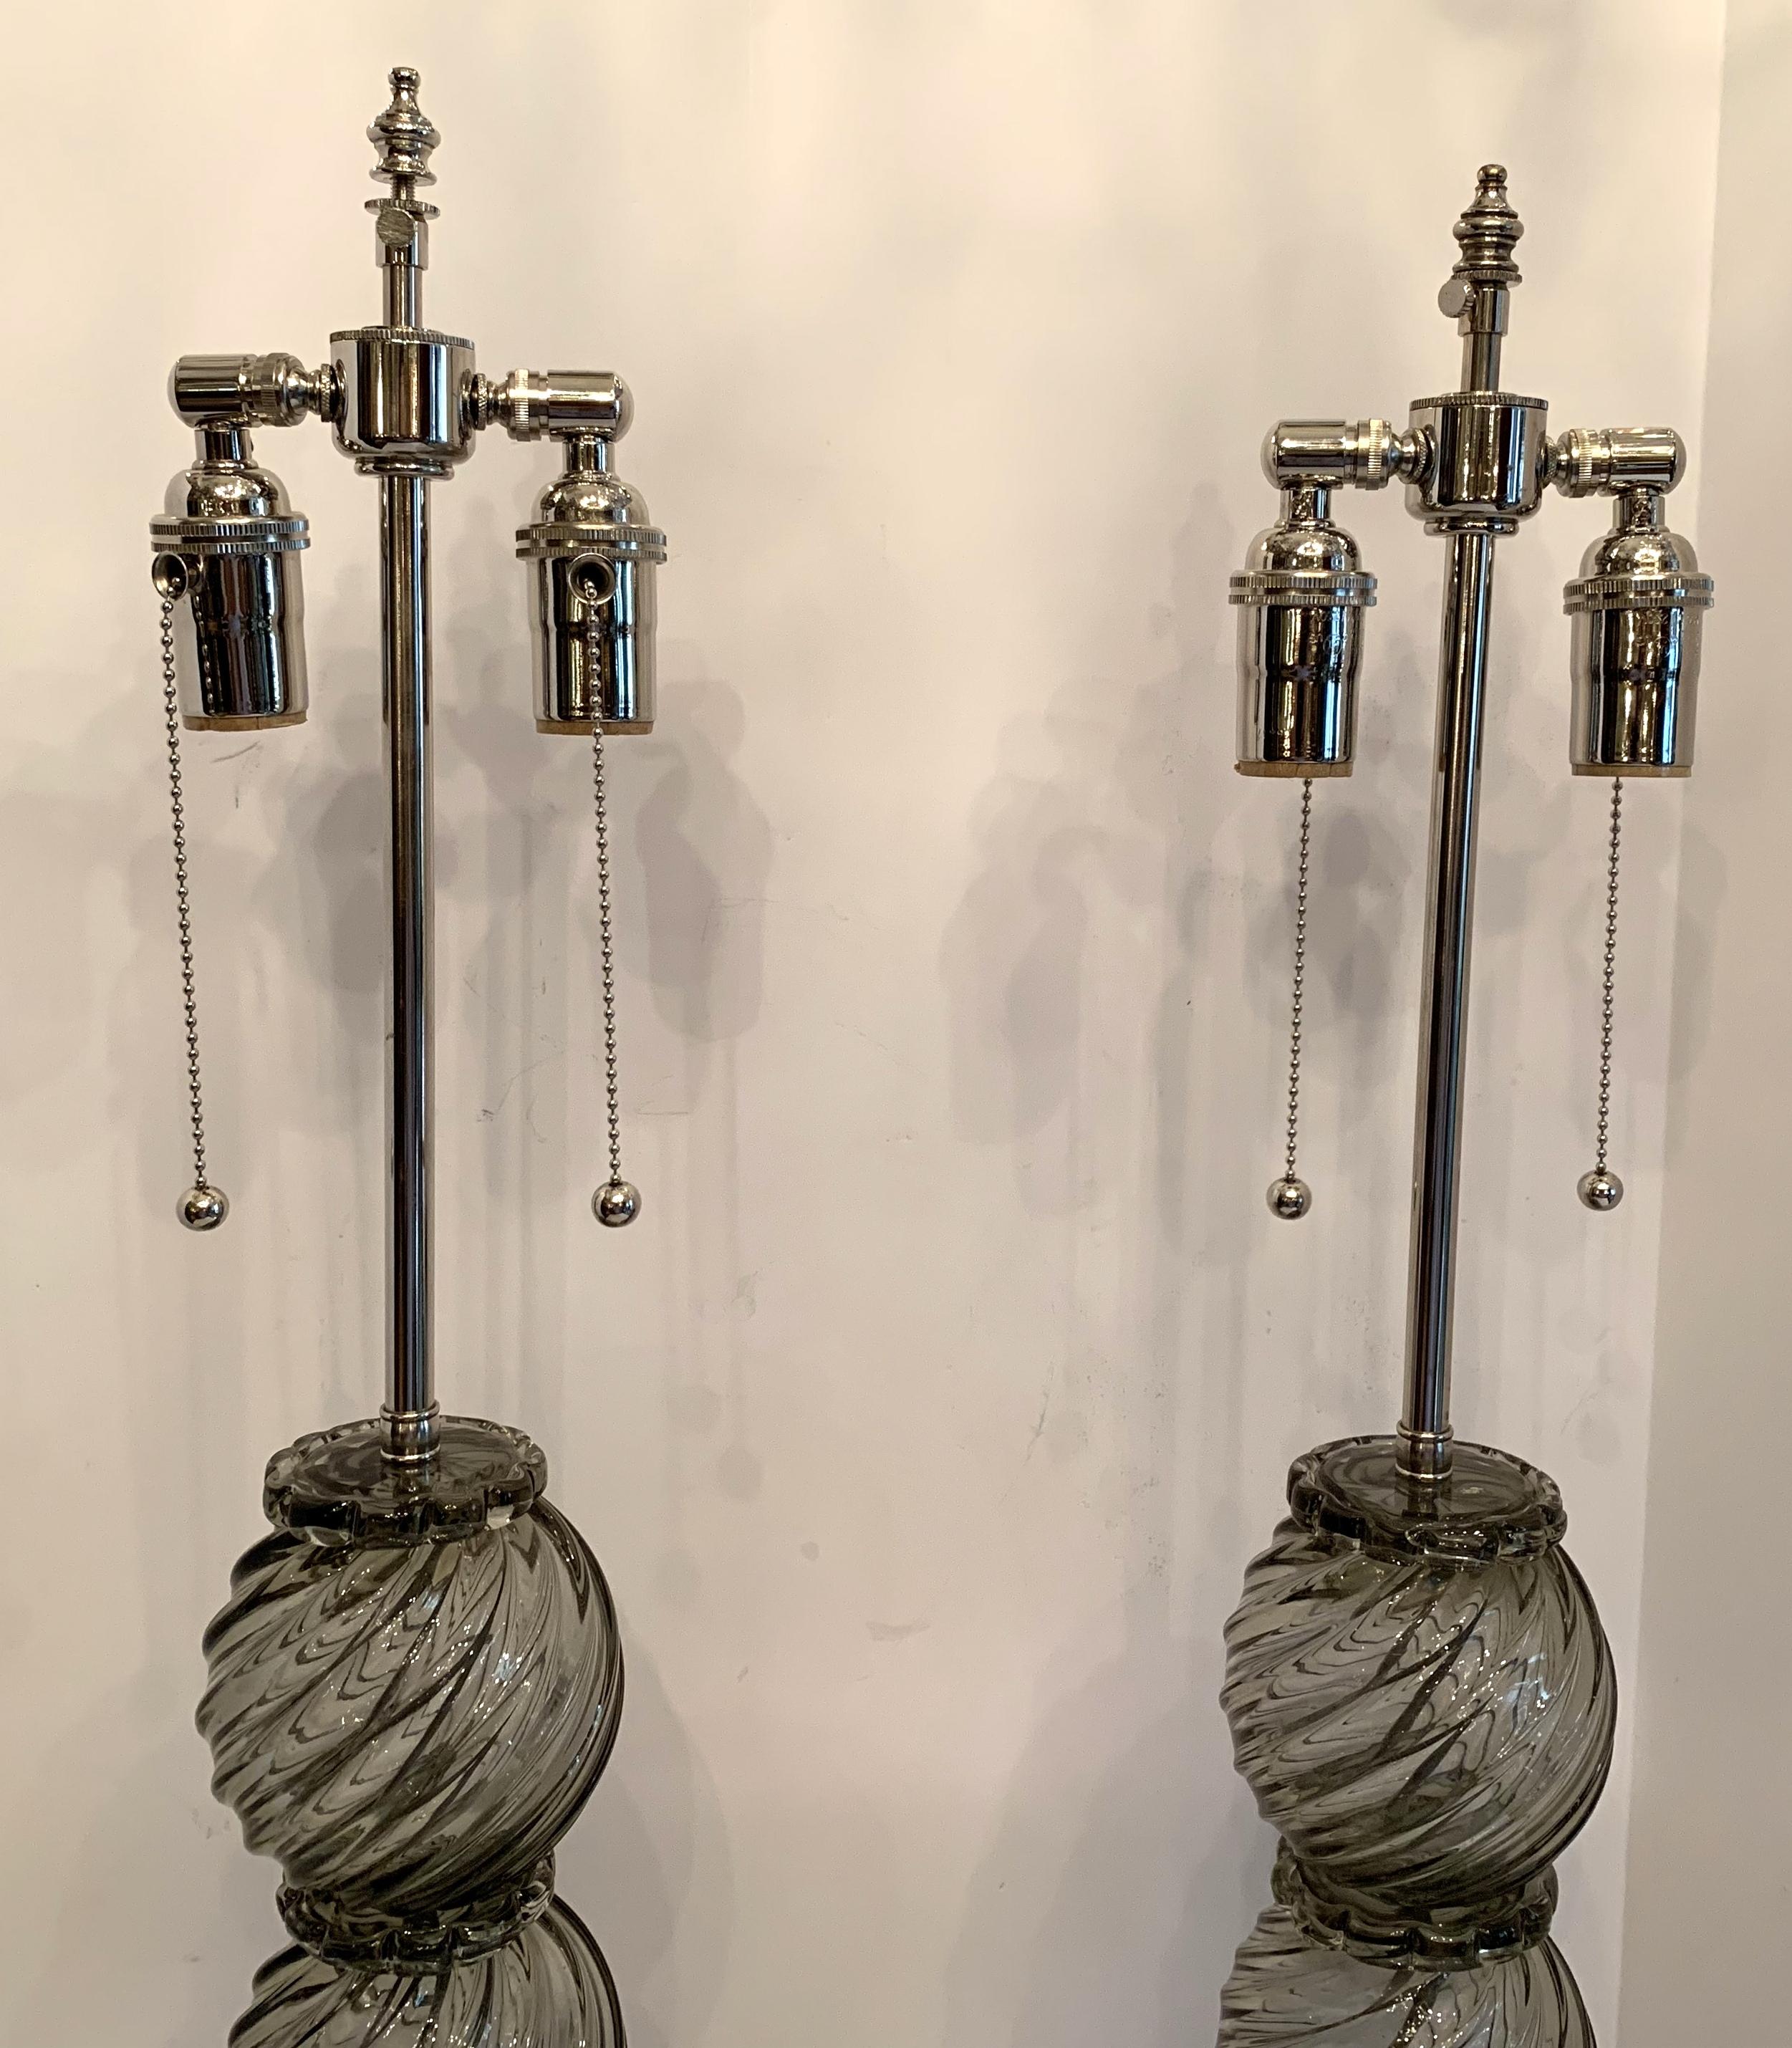 A Wonderful pair of Mid-Century Modern Italian / Murano Venetian swirl form smoke grey color art glass lamps in the Art Deco style with new polished nickel fittings and wiring.